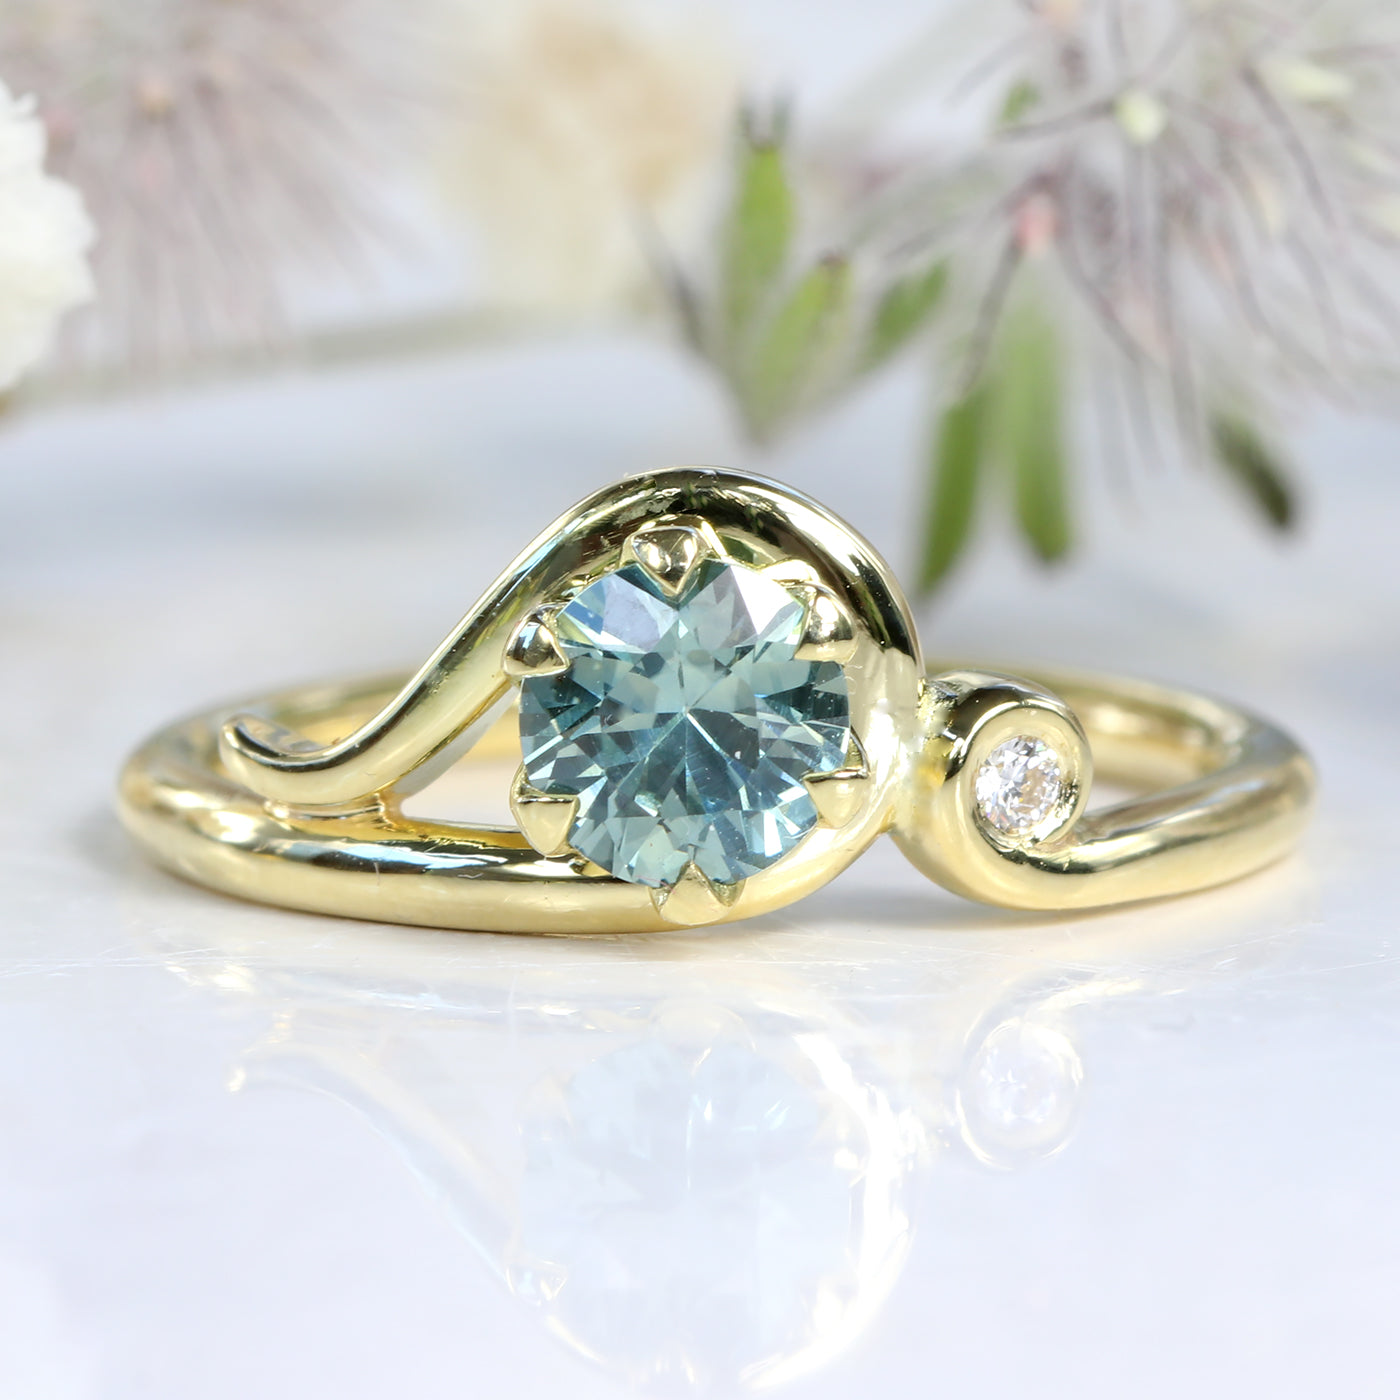 Custom 18ct Gold Art Nouveau Inspired Sapphire and Diamond Engagement Ring